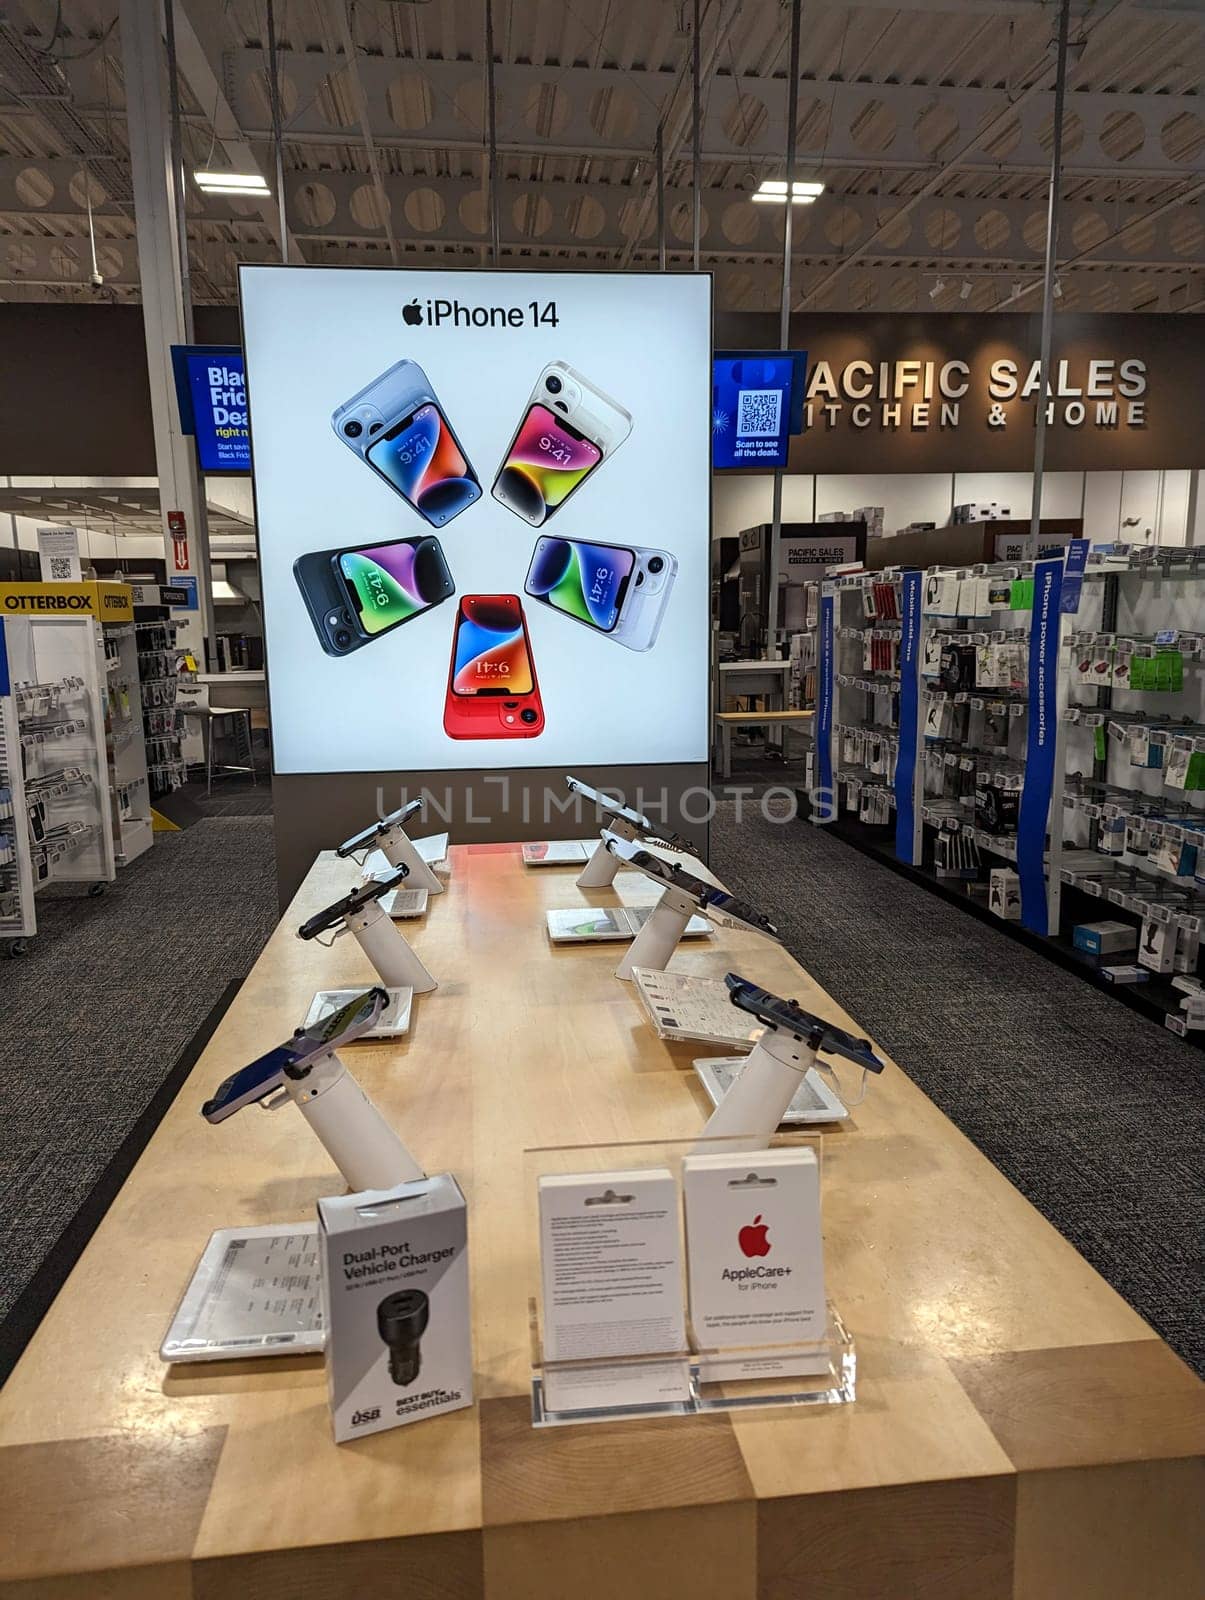 Honolulu - November 1, 2022:   A display of the new iPhone 14 in various colors inside a Best Buy store. The display consists of a large poster and a table with several iPhone 14 models on it. The background shows other electronics and appliances for sale in the store.